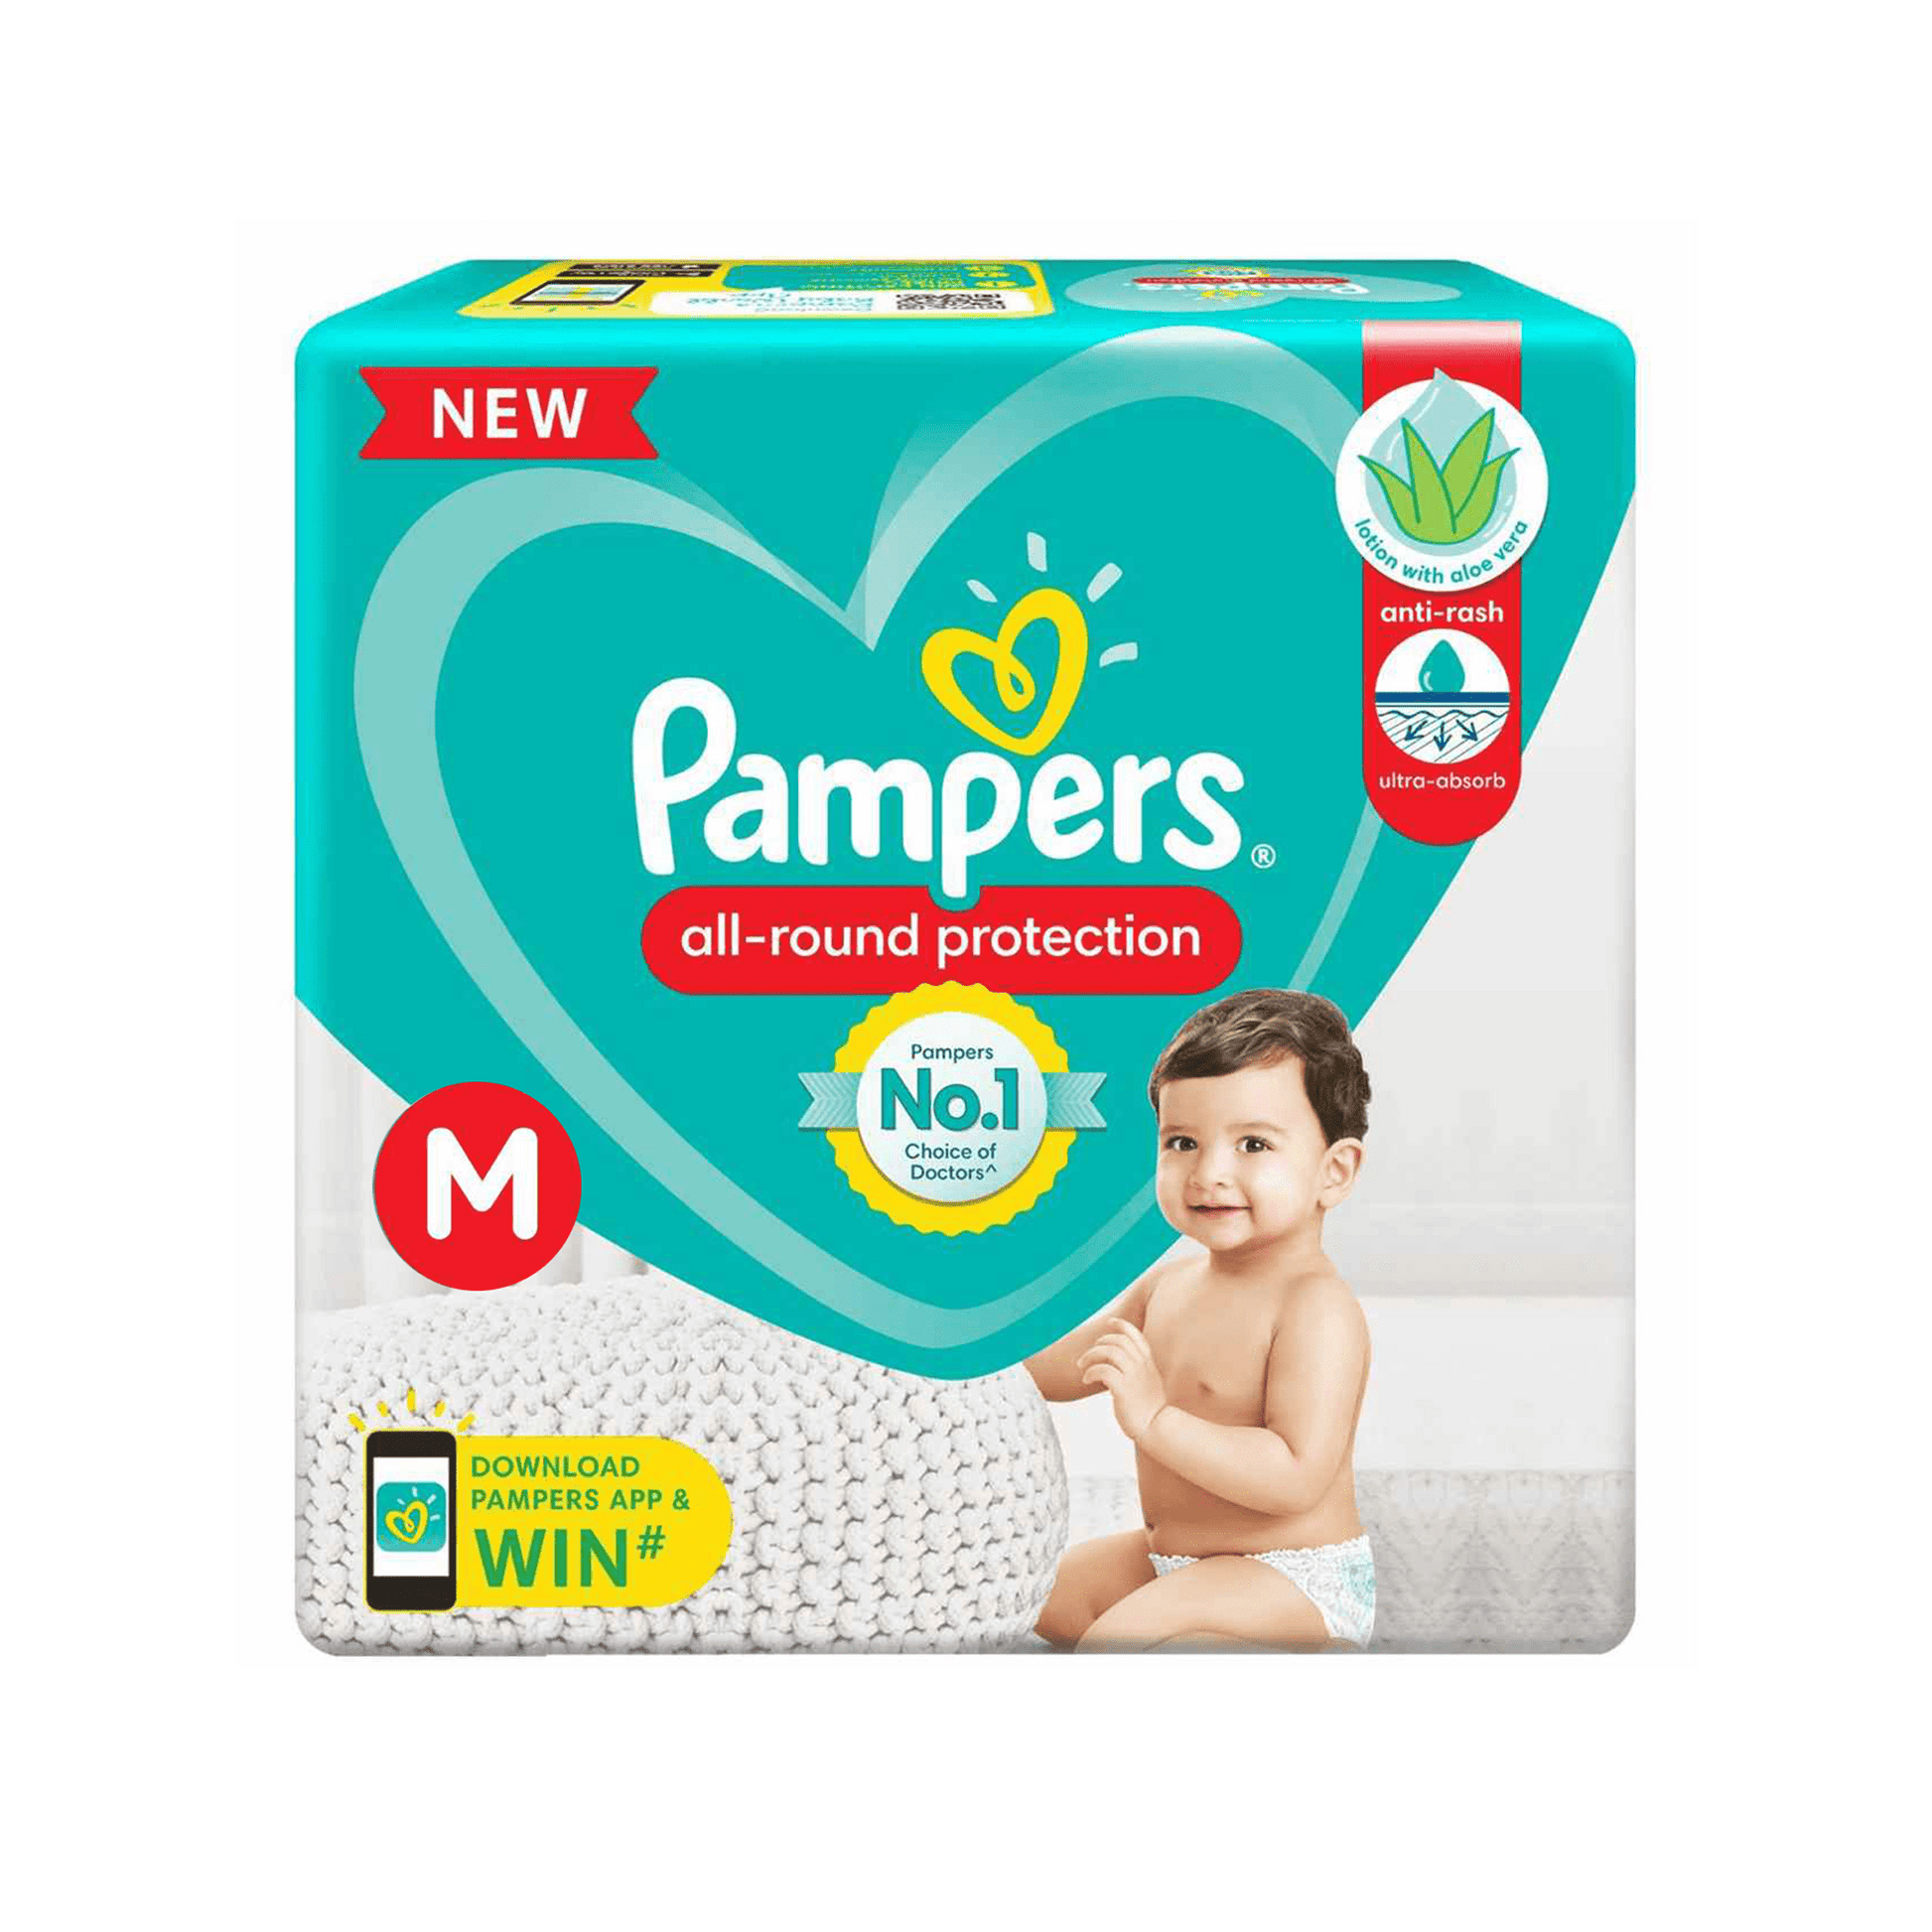 Pampers All Round Protection Diaper Pants, Size-M.